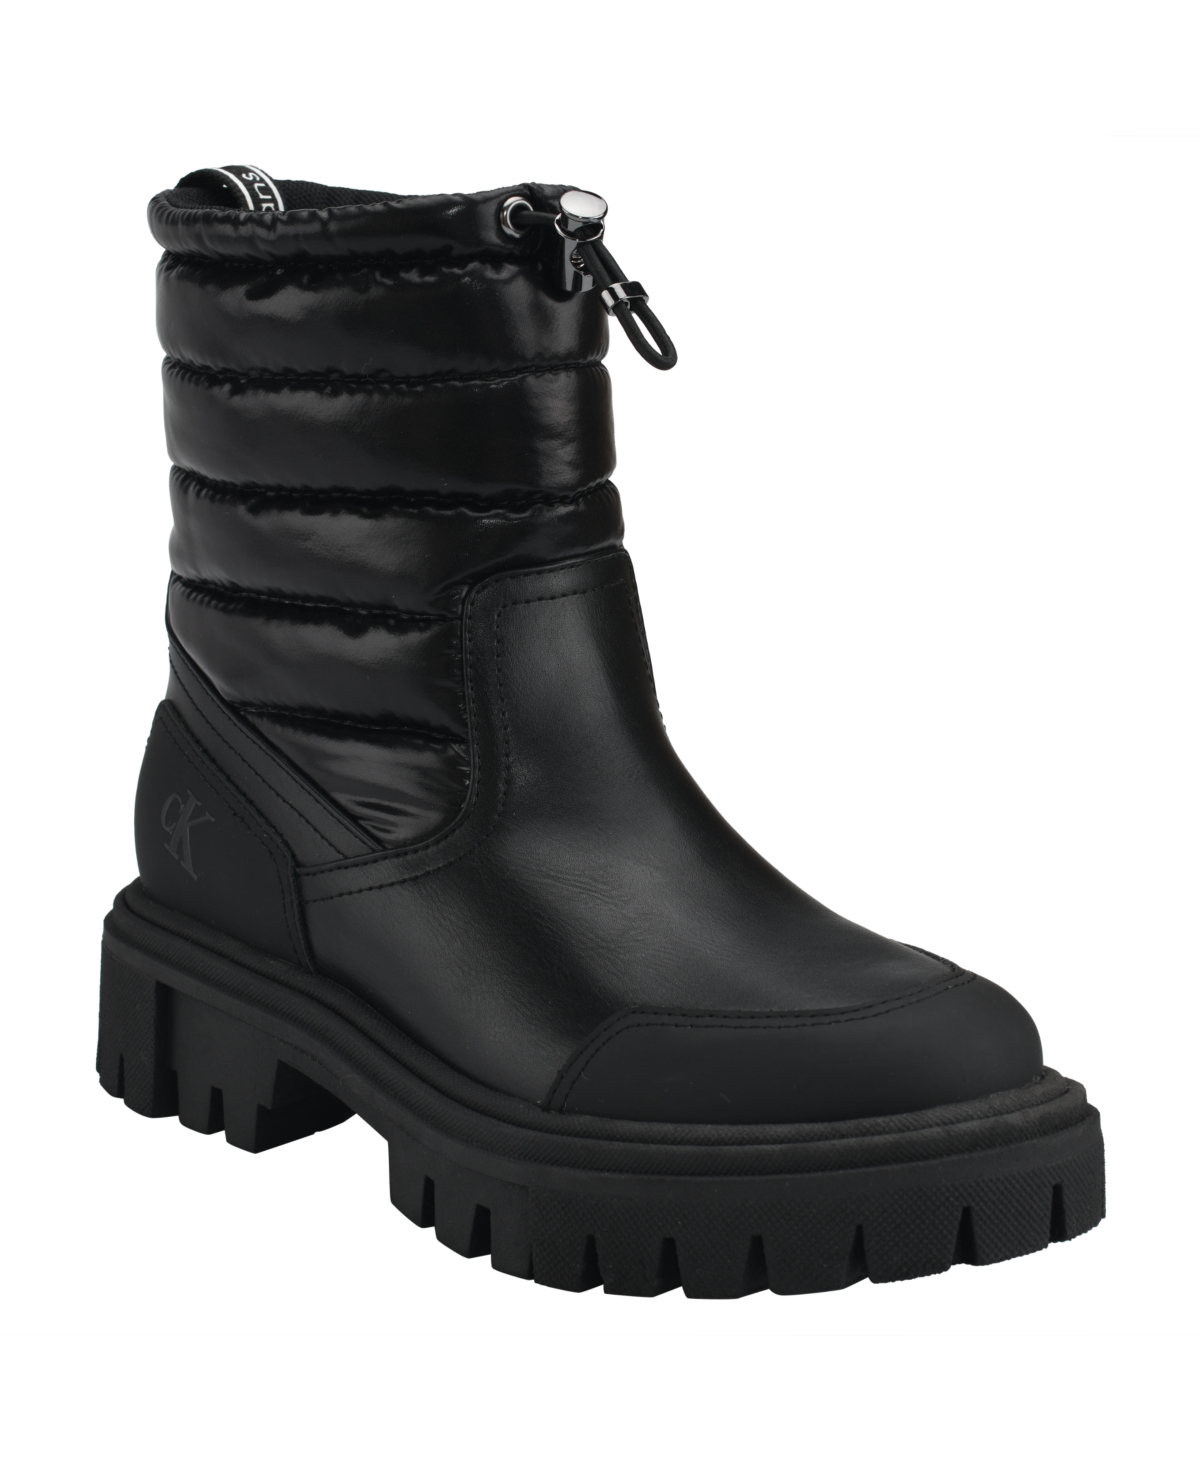 UPC 196496824821 product image for Calvin Klein Women's Relika Lug Sole Nylon Puffy Cold Weather Winter Booties Wom | upcitemdb.com